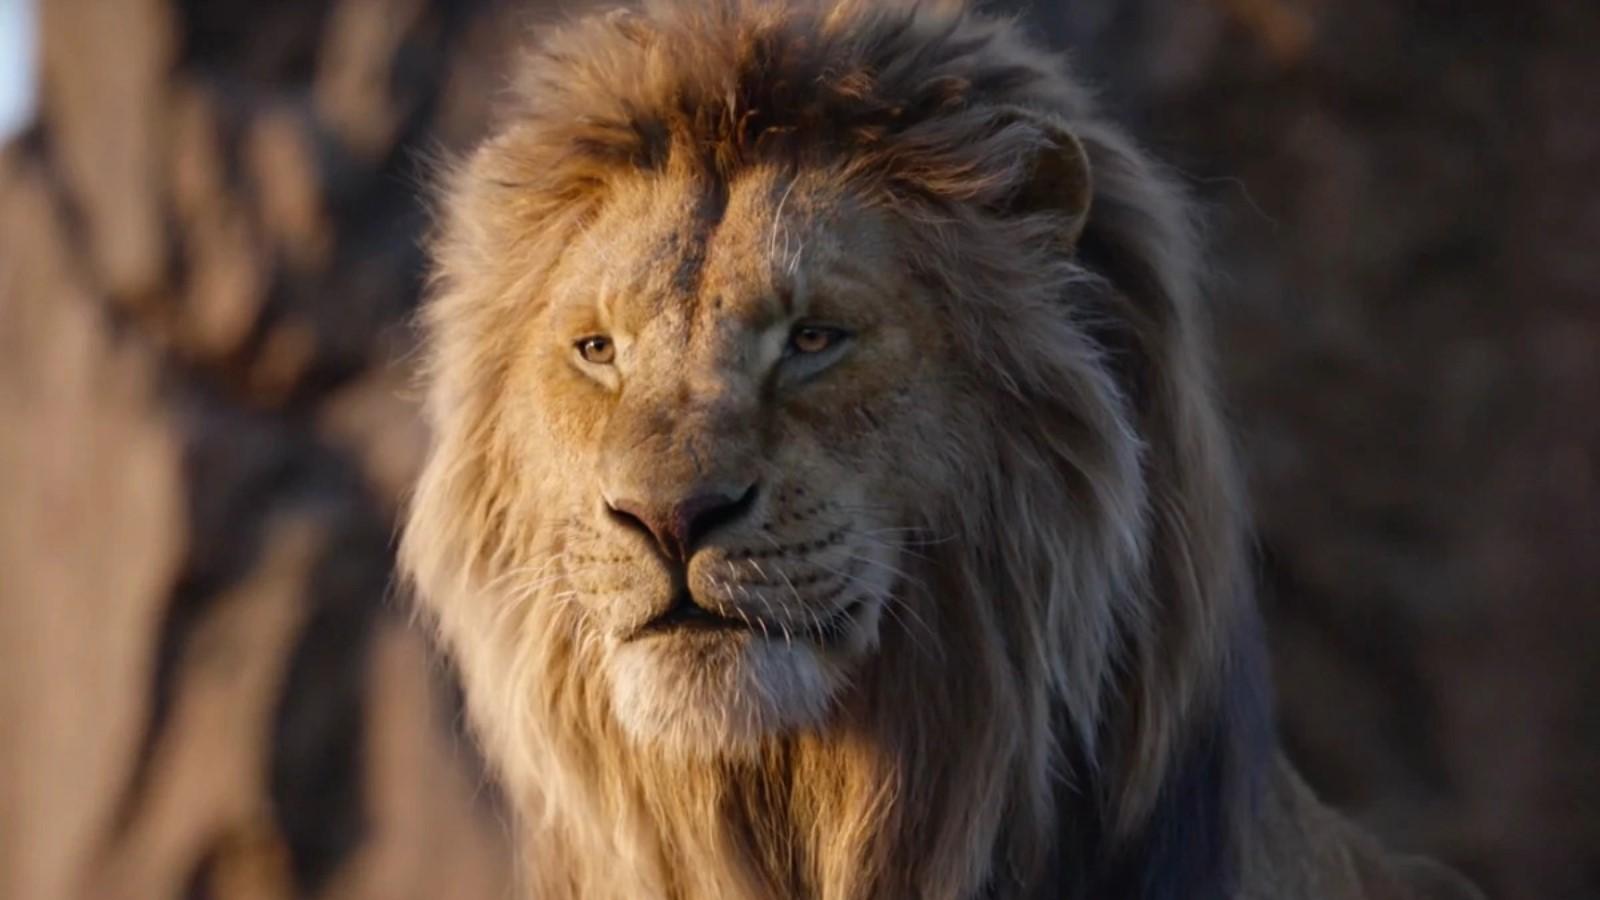 Mufasa in Disney's The Lion King